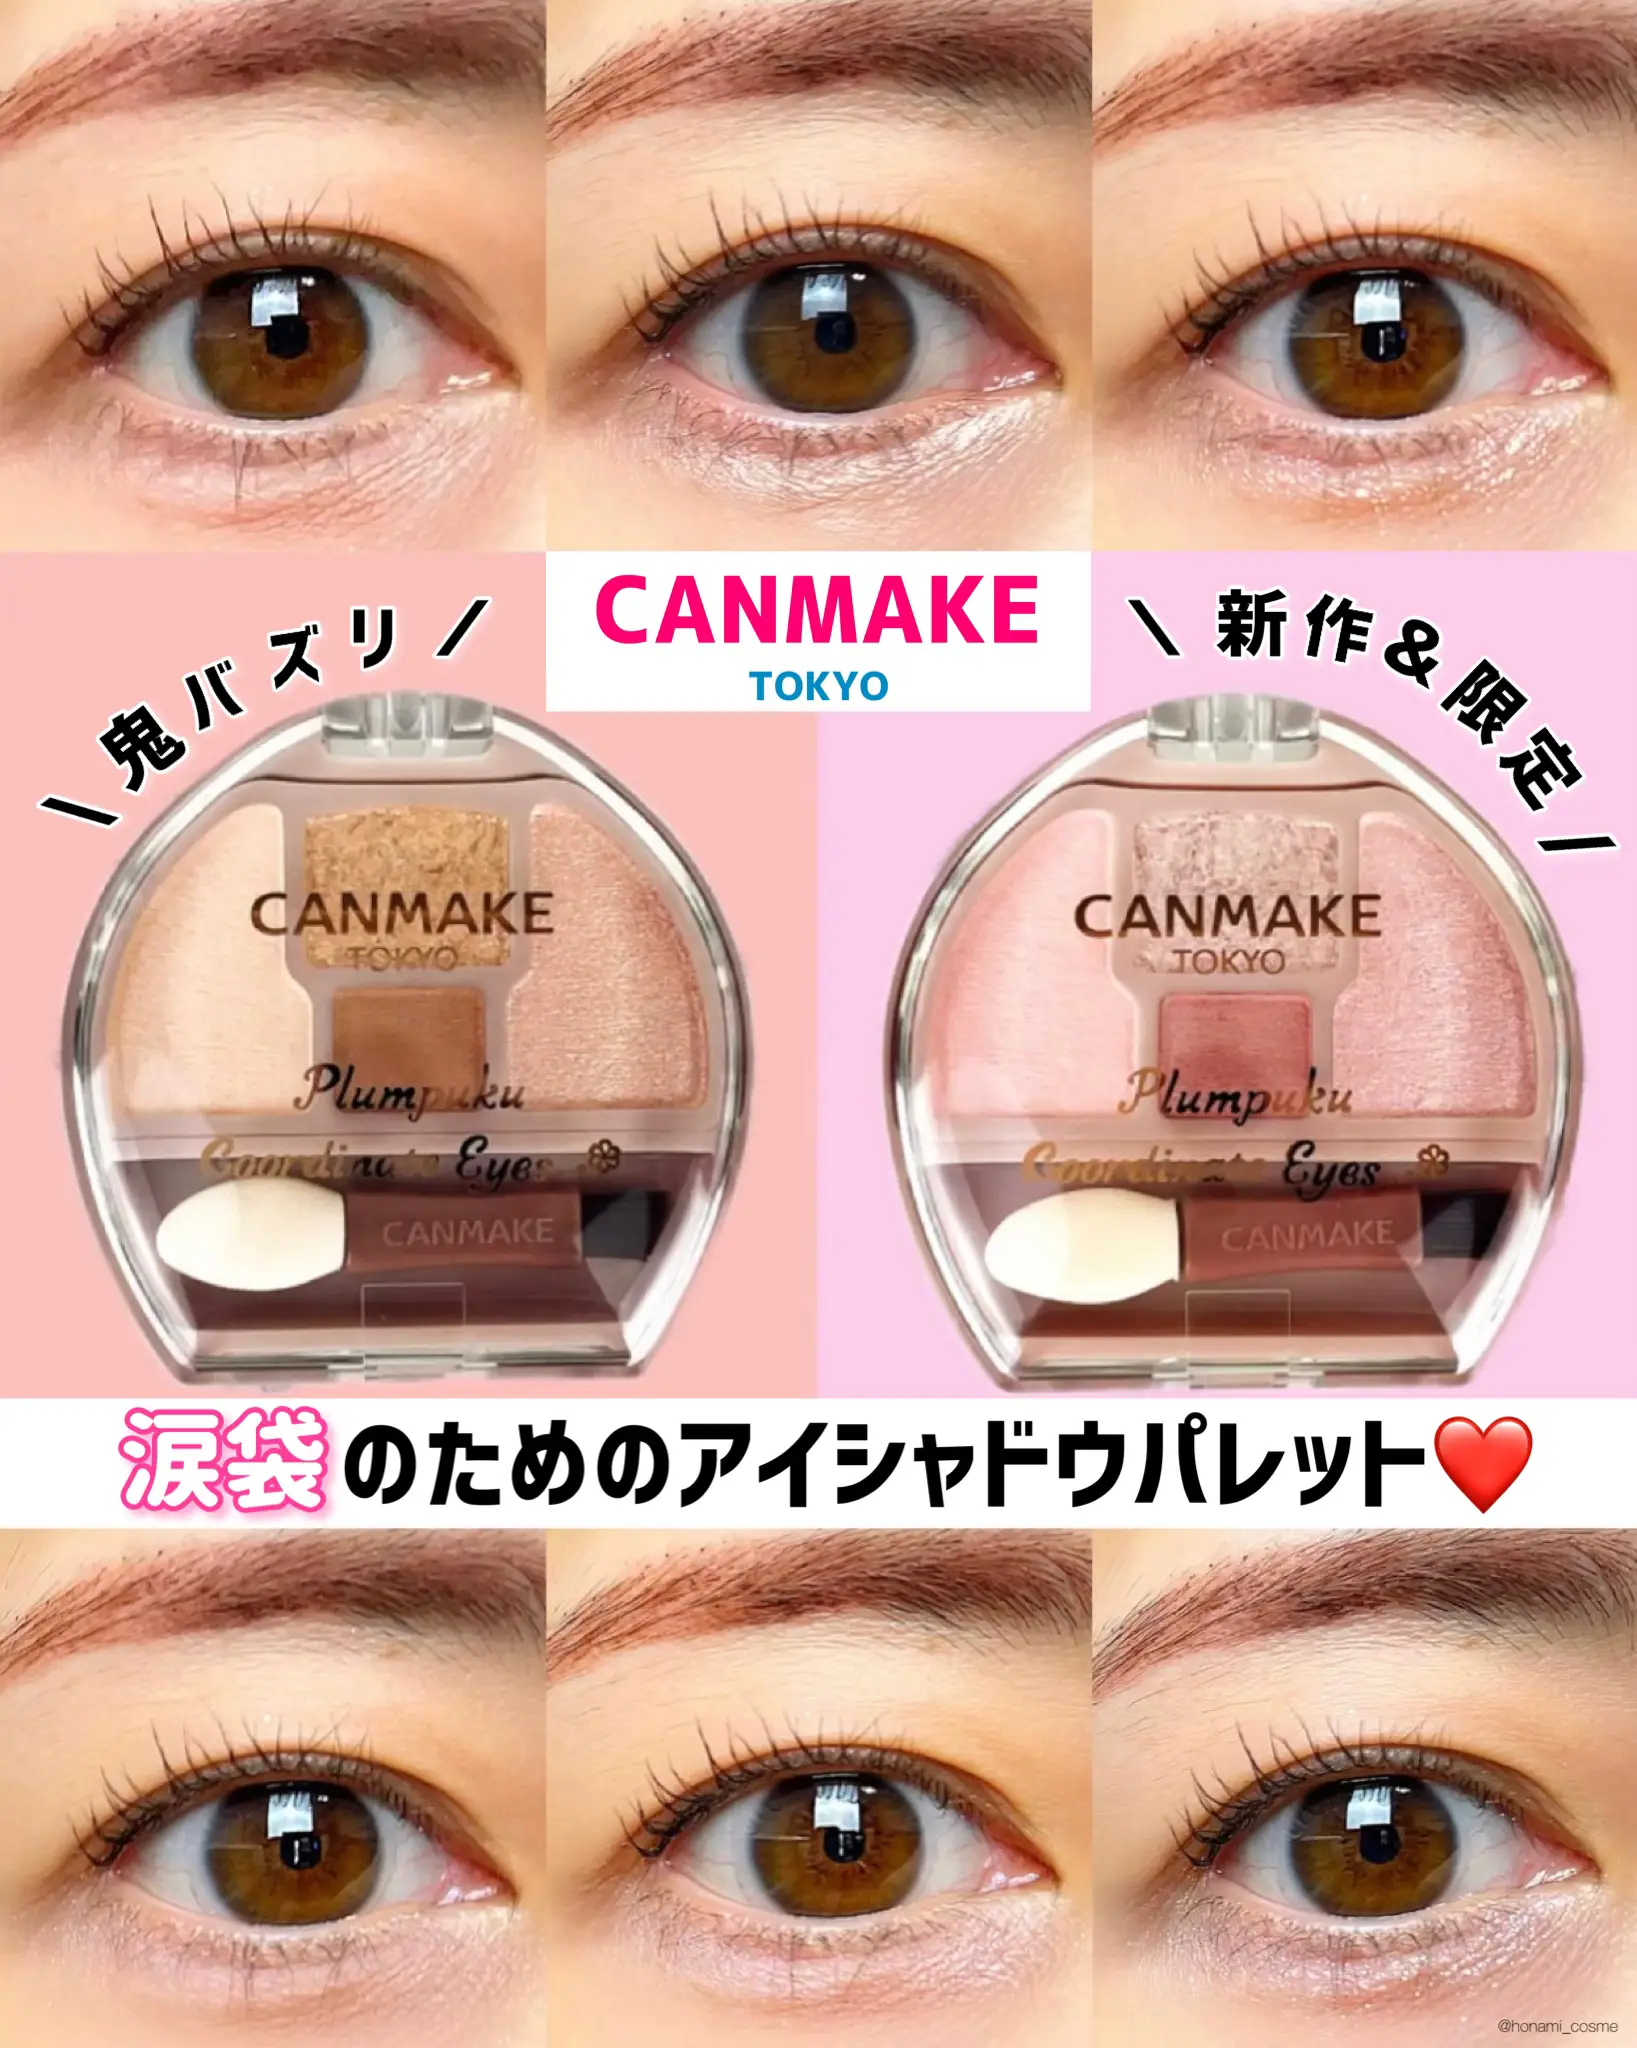 Oni buzz] CANMAKE new & limited! Ear bag dedicated palette